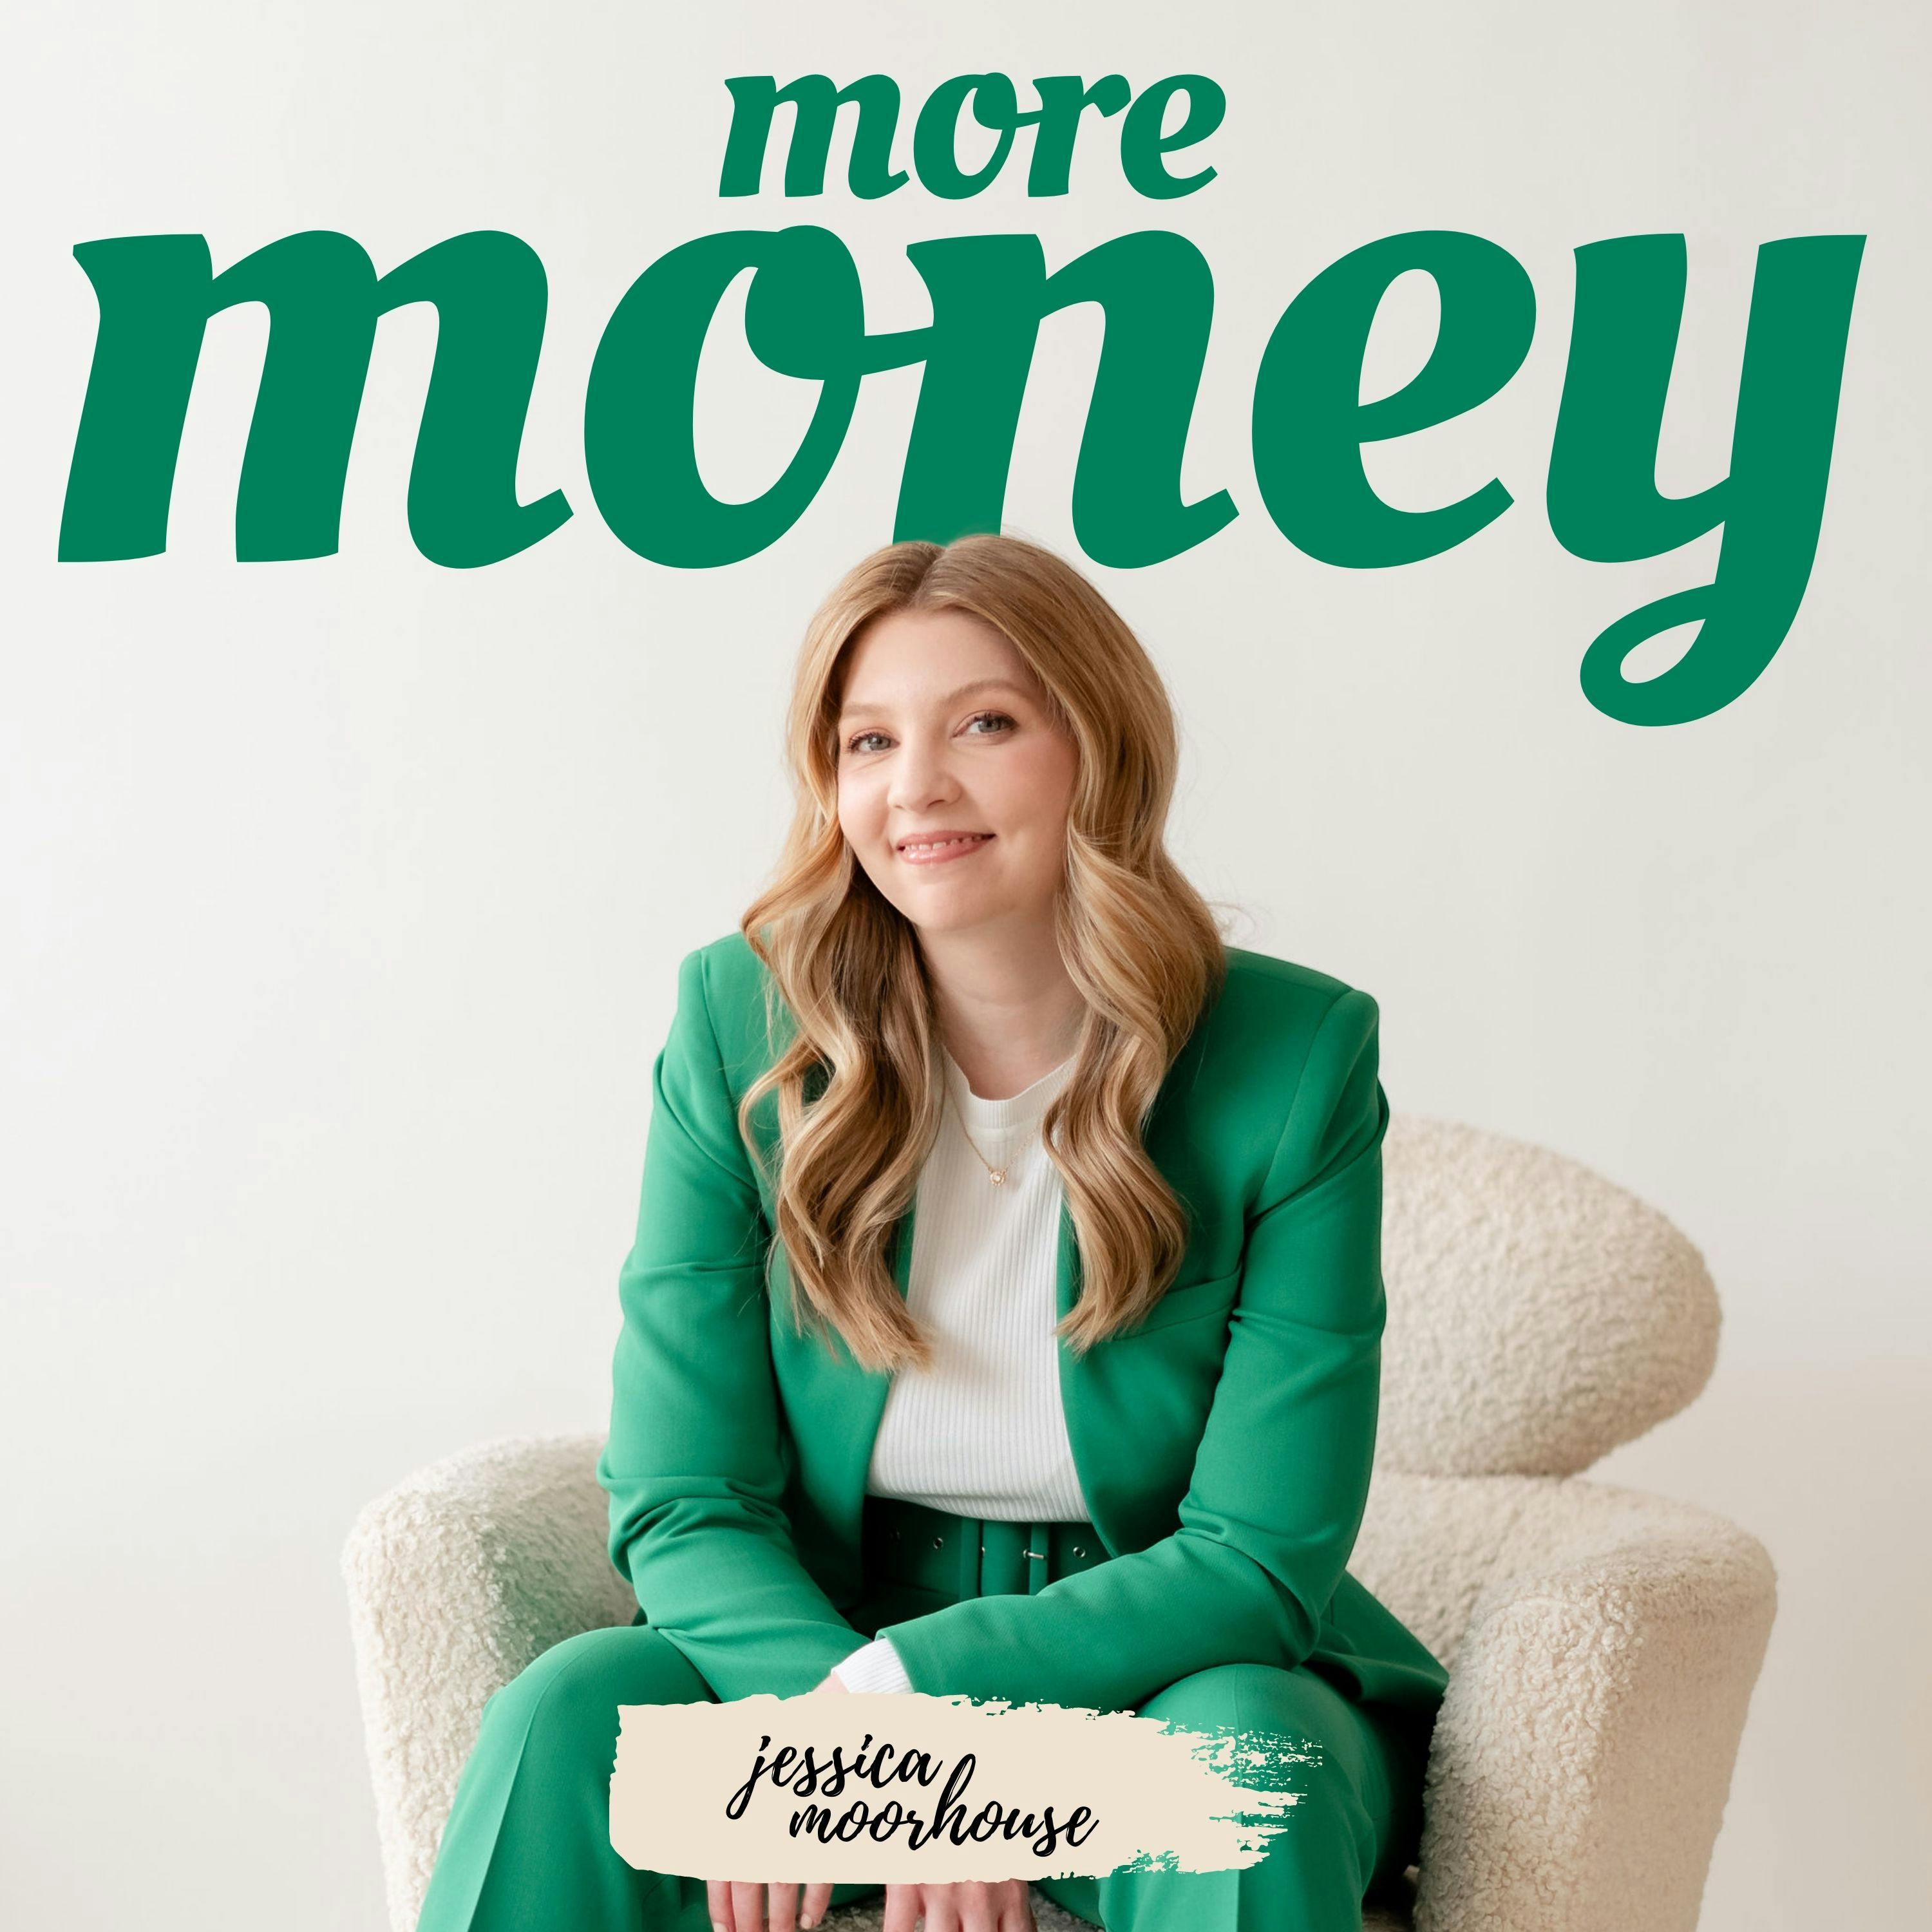 232 How to Be Smart with Your Money During the COVID-19 Pandemic - Janna Herron, Personal Finance Editor at Yahoo Finance and Cashay